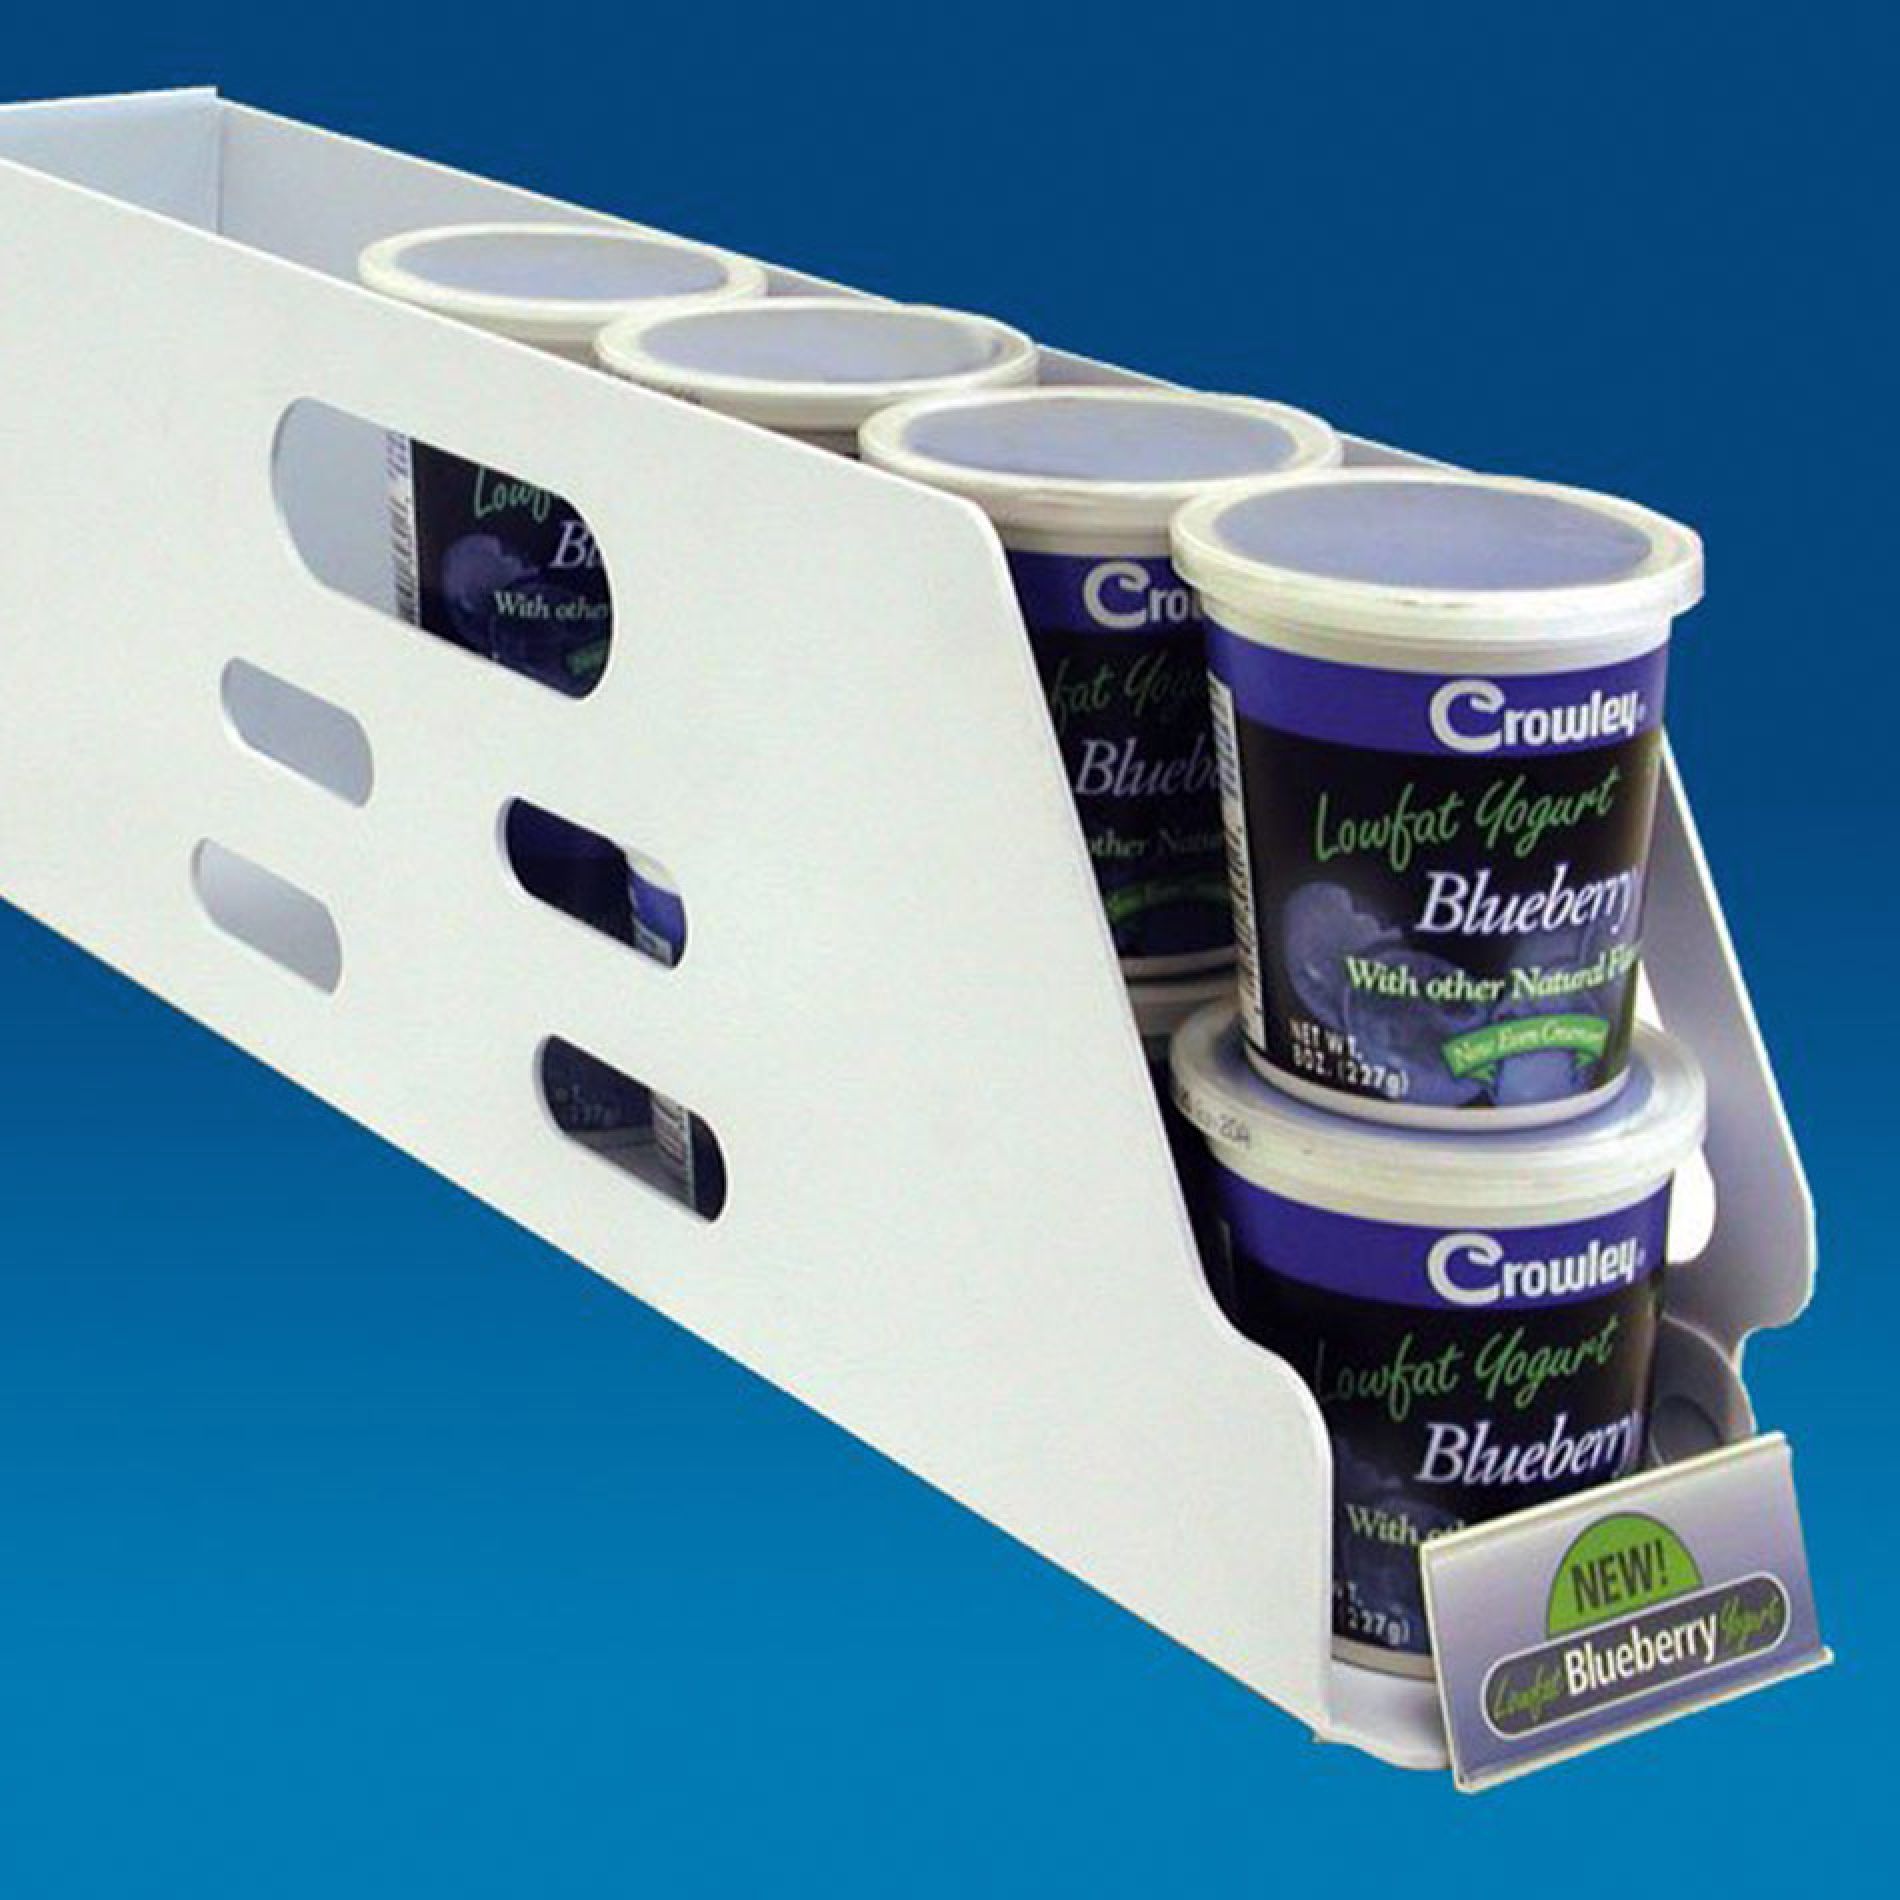 CLEAR SCAN® STOREWIDE LABEL HOLDER SYSTEM Gallery Image